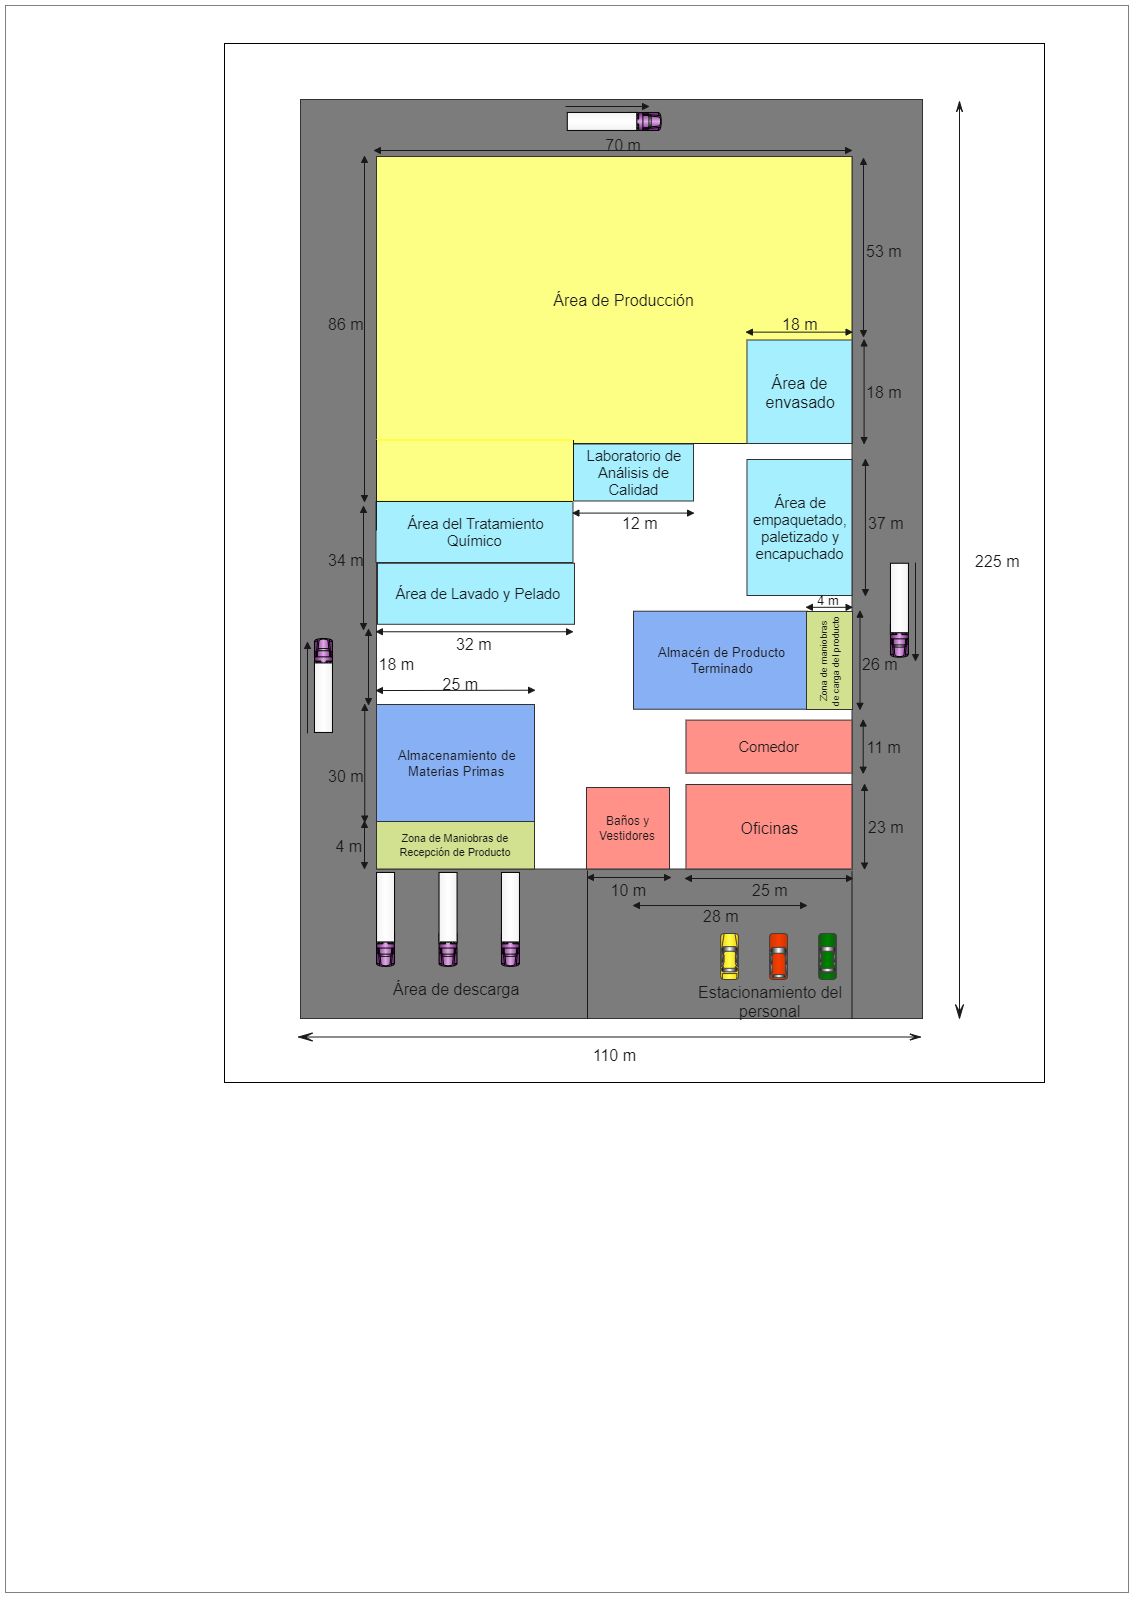 Production Factory Floor Plan diagram shows the important areas of a production factory, including production, area of telecommunication, reception area, parking lot, office area, corridor, and more. It should be noted here that a factory, manufacturing p